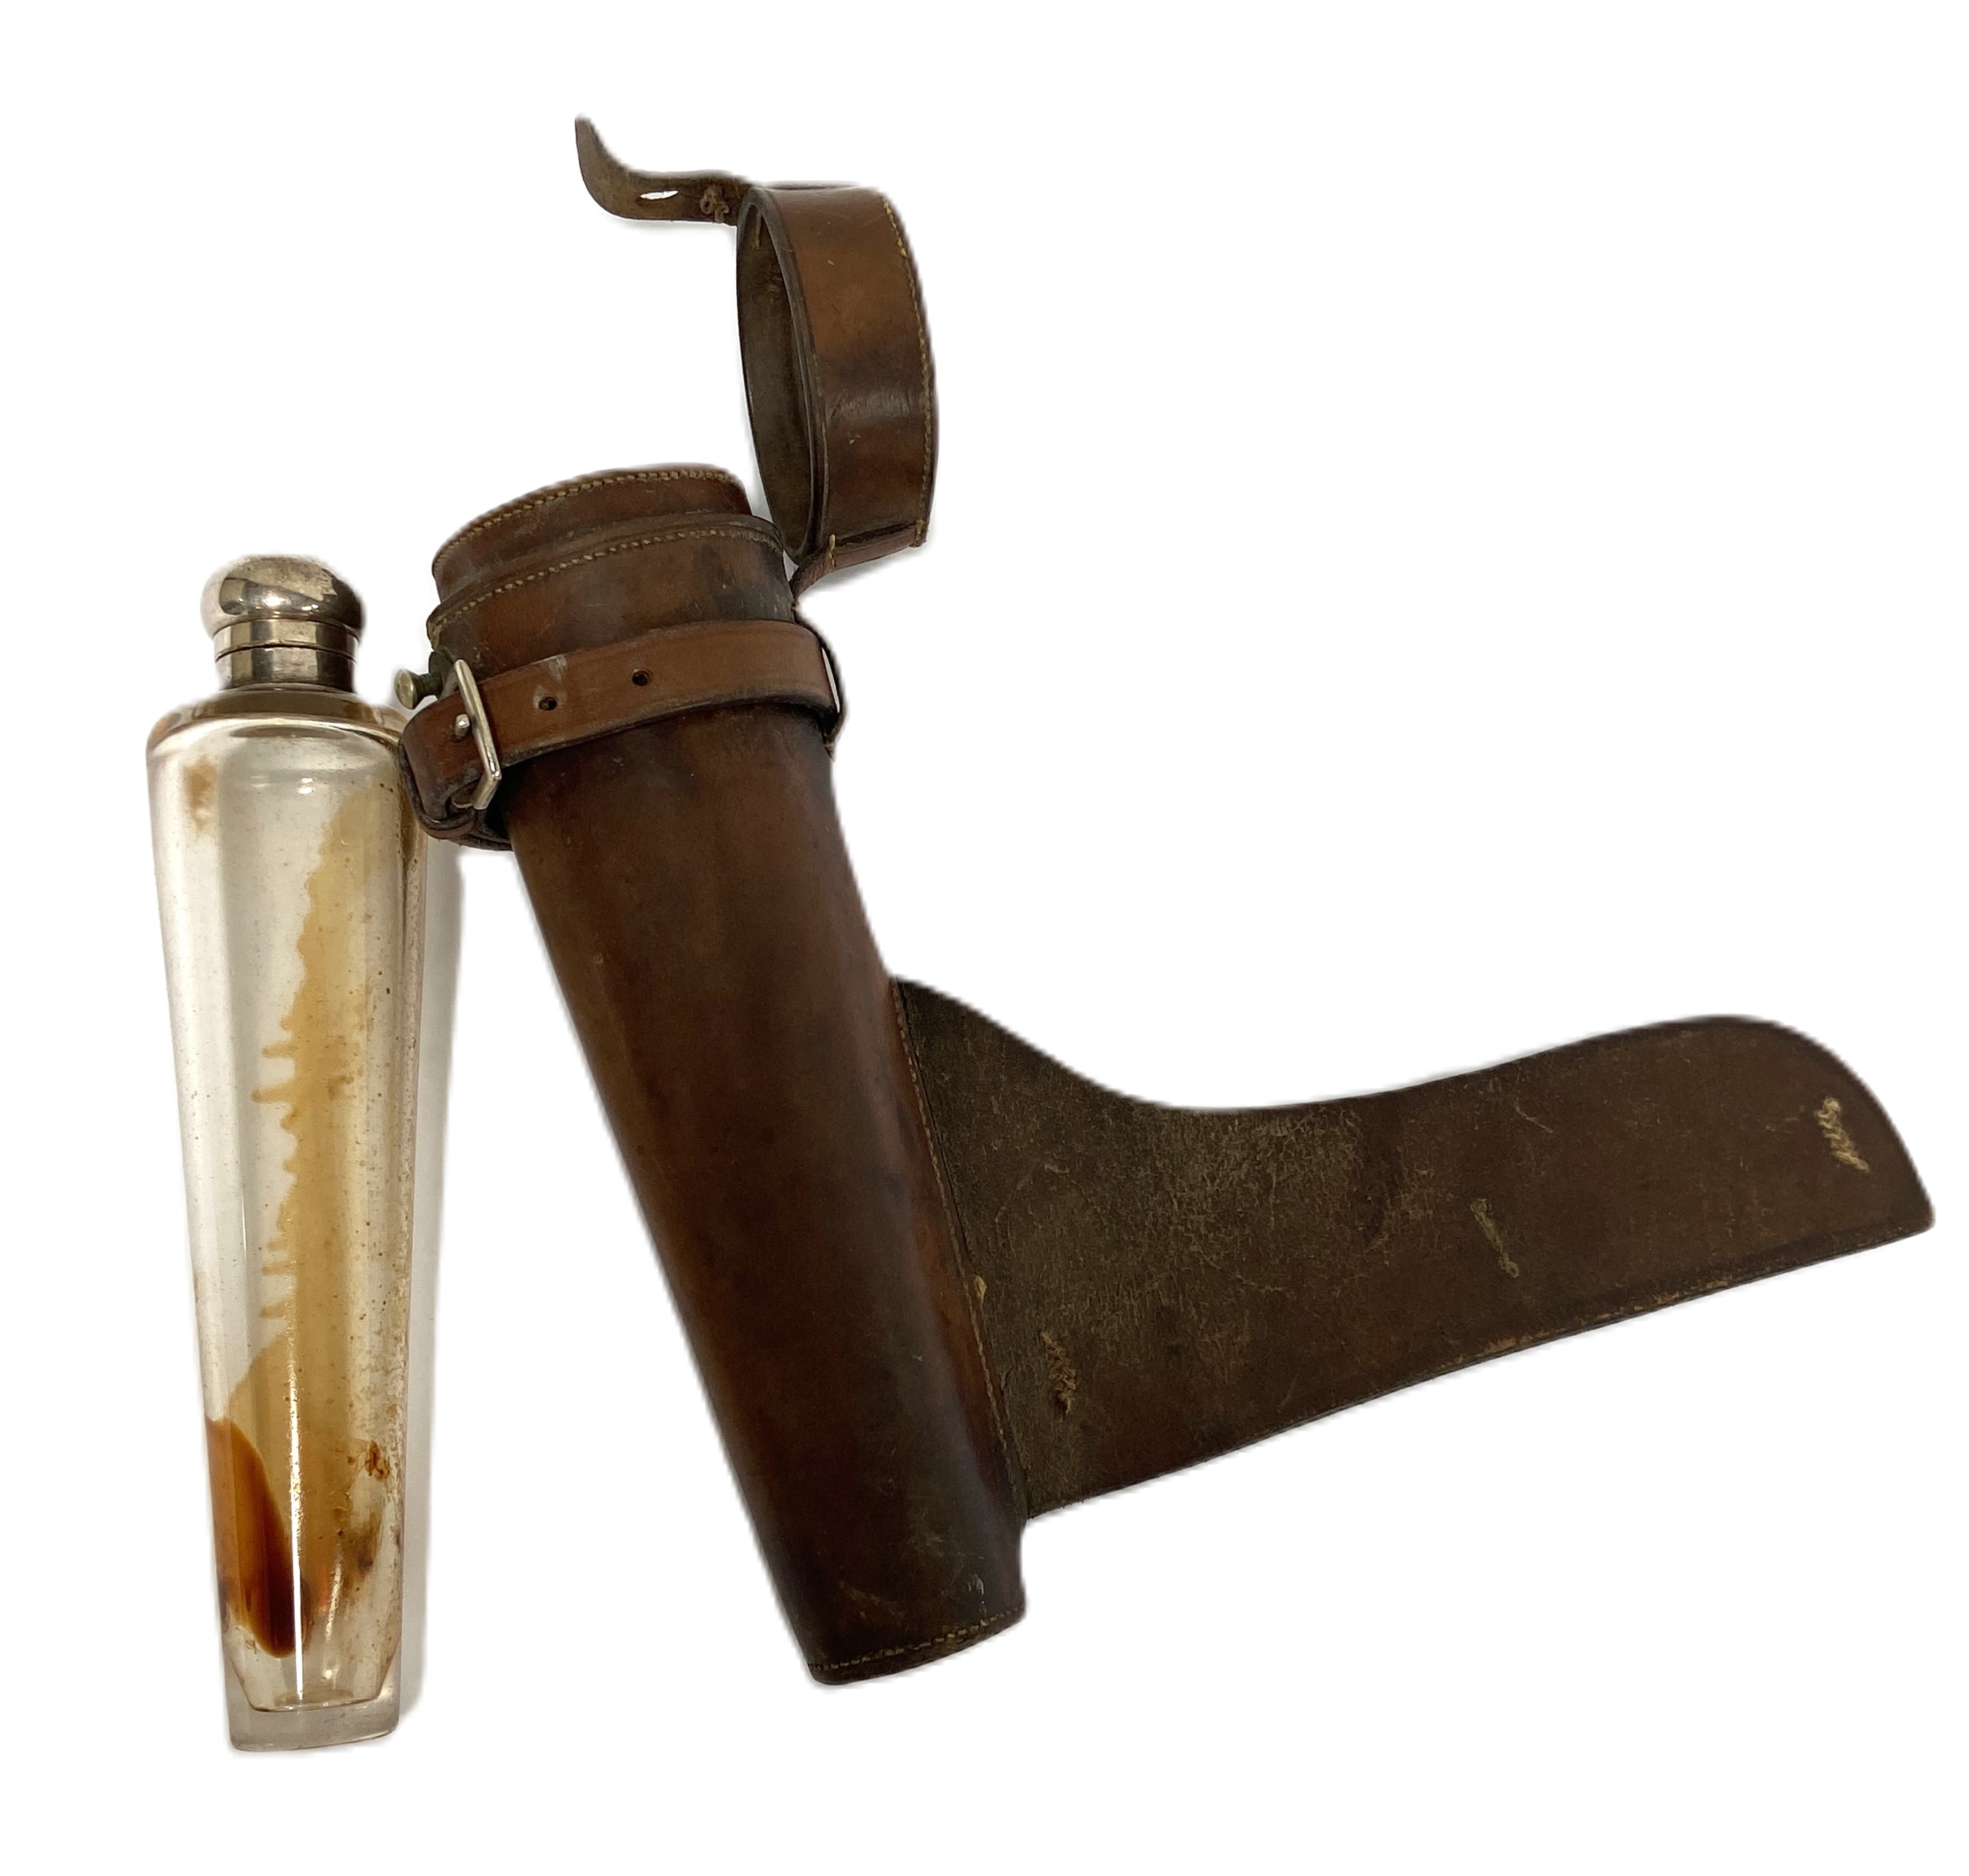 A vintage Hunter's hip flask, with tapered bottle, silver plated cap and leather holster (2)